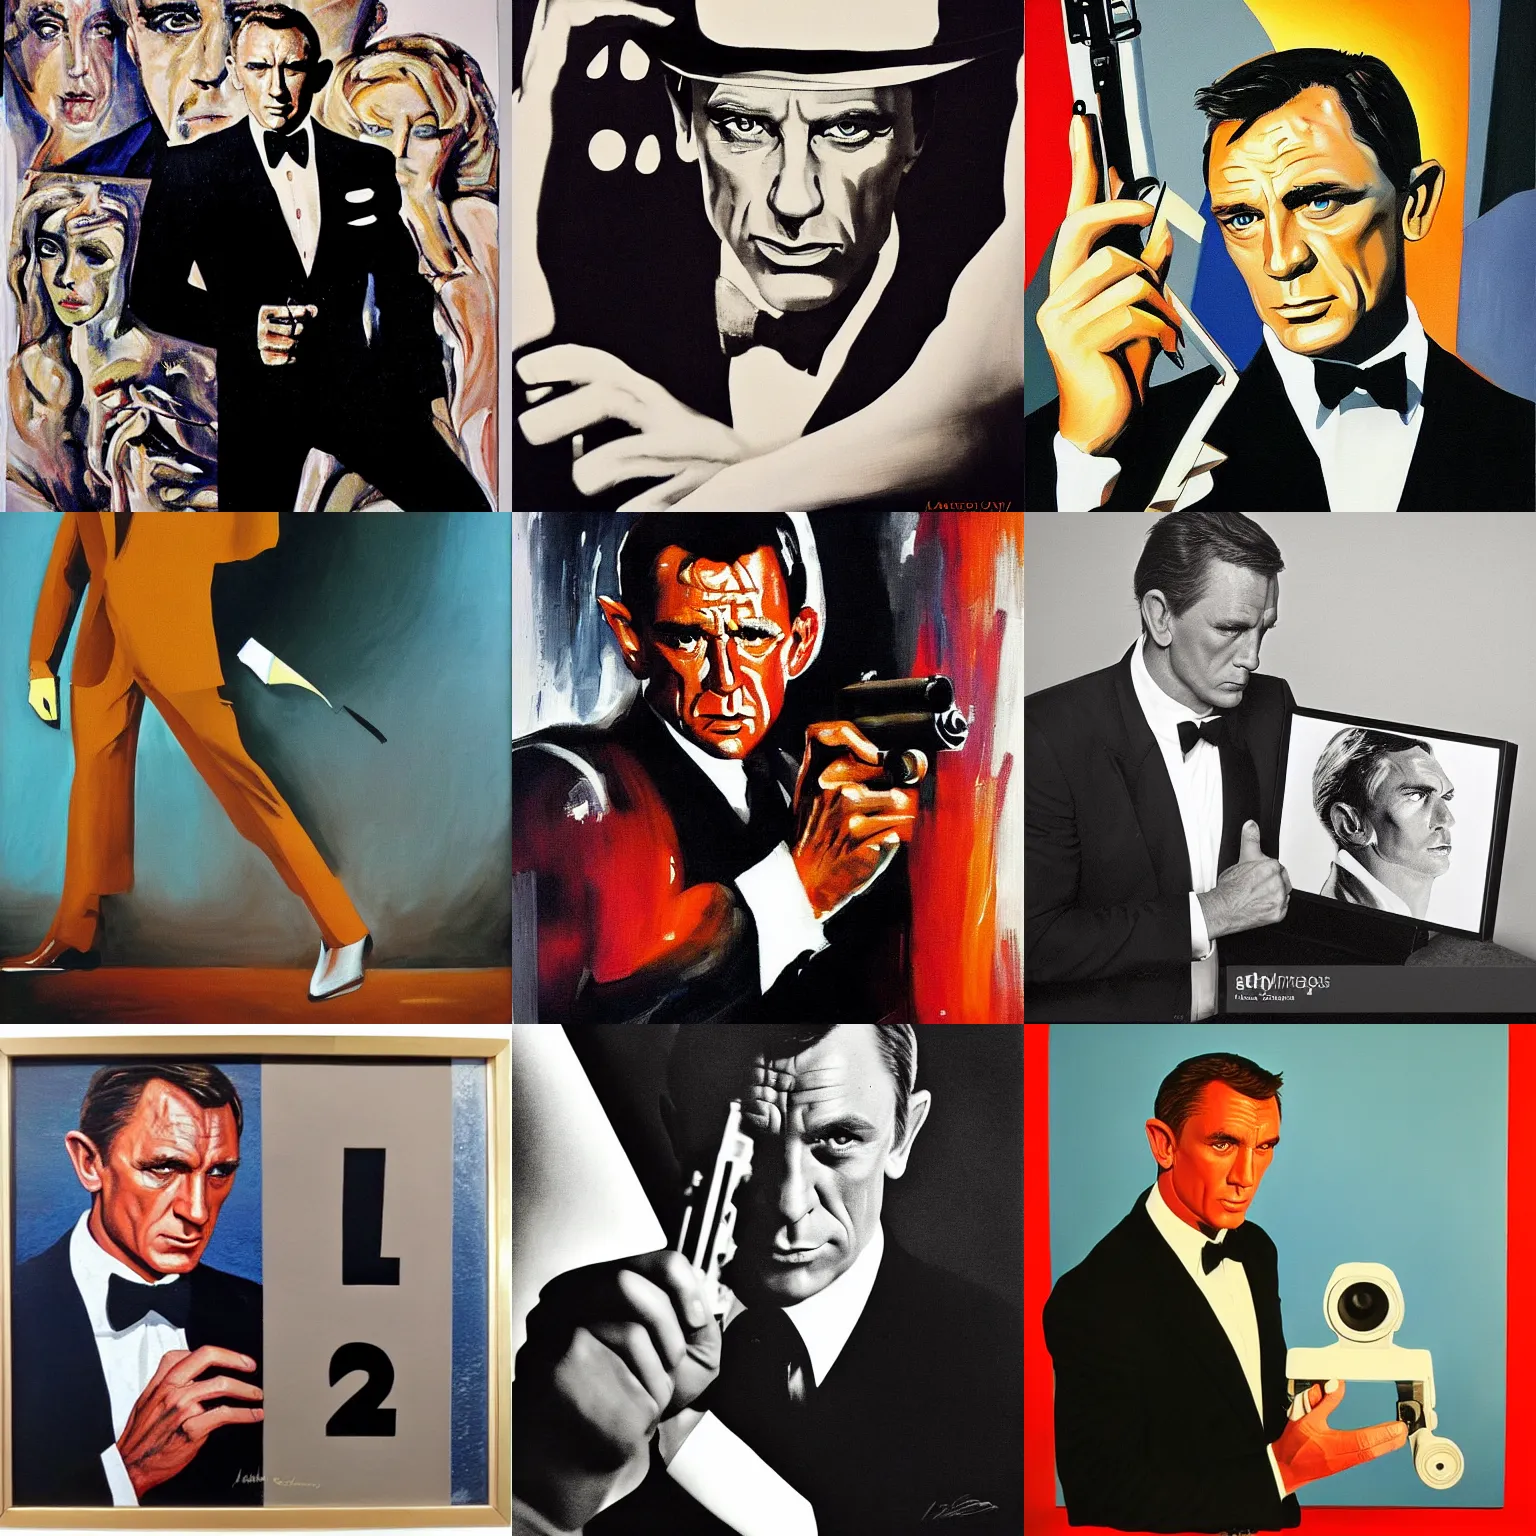 james bond intro by painter and photographer laszlo | Stable Diffusion ...